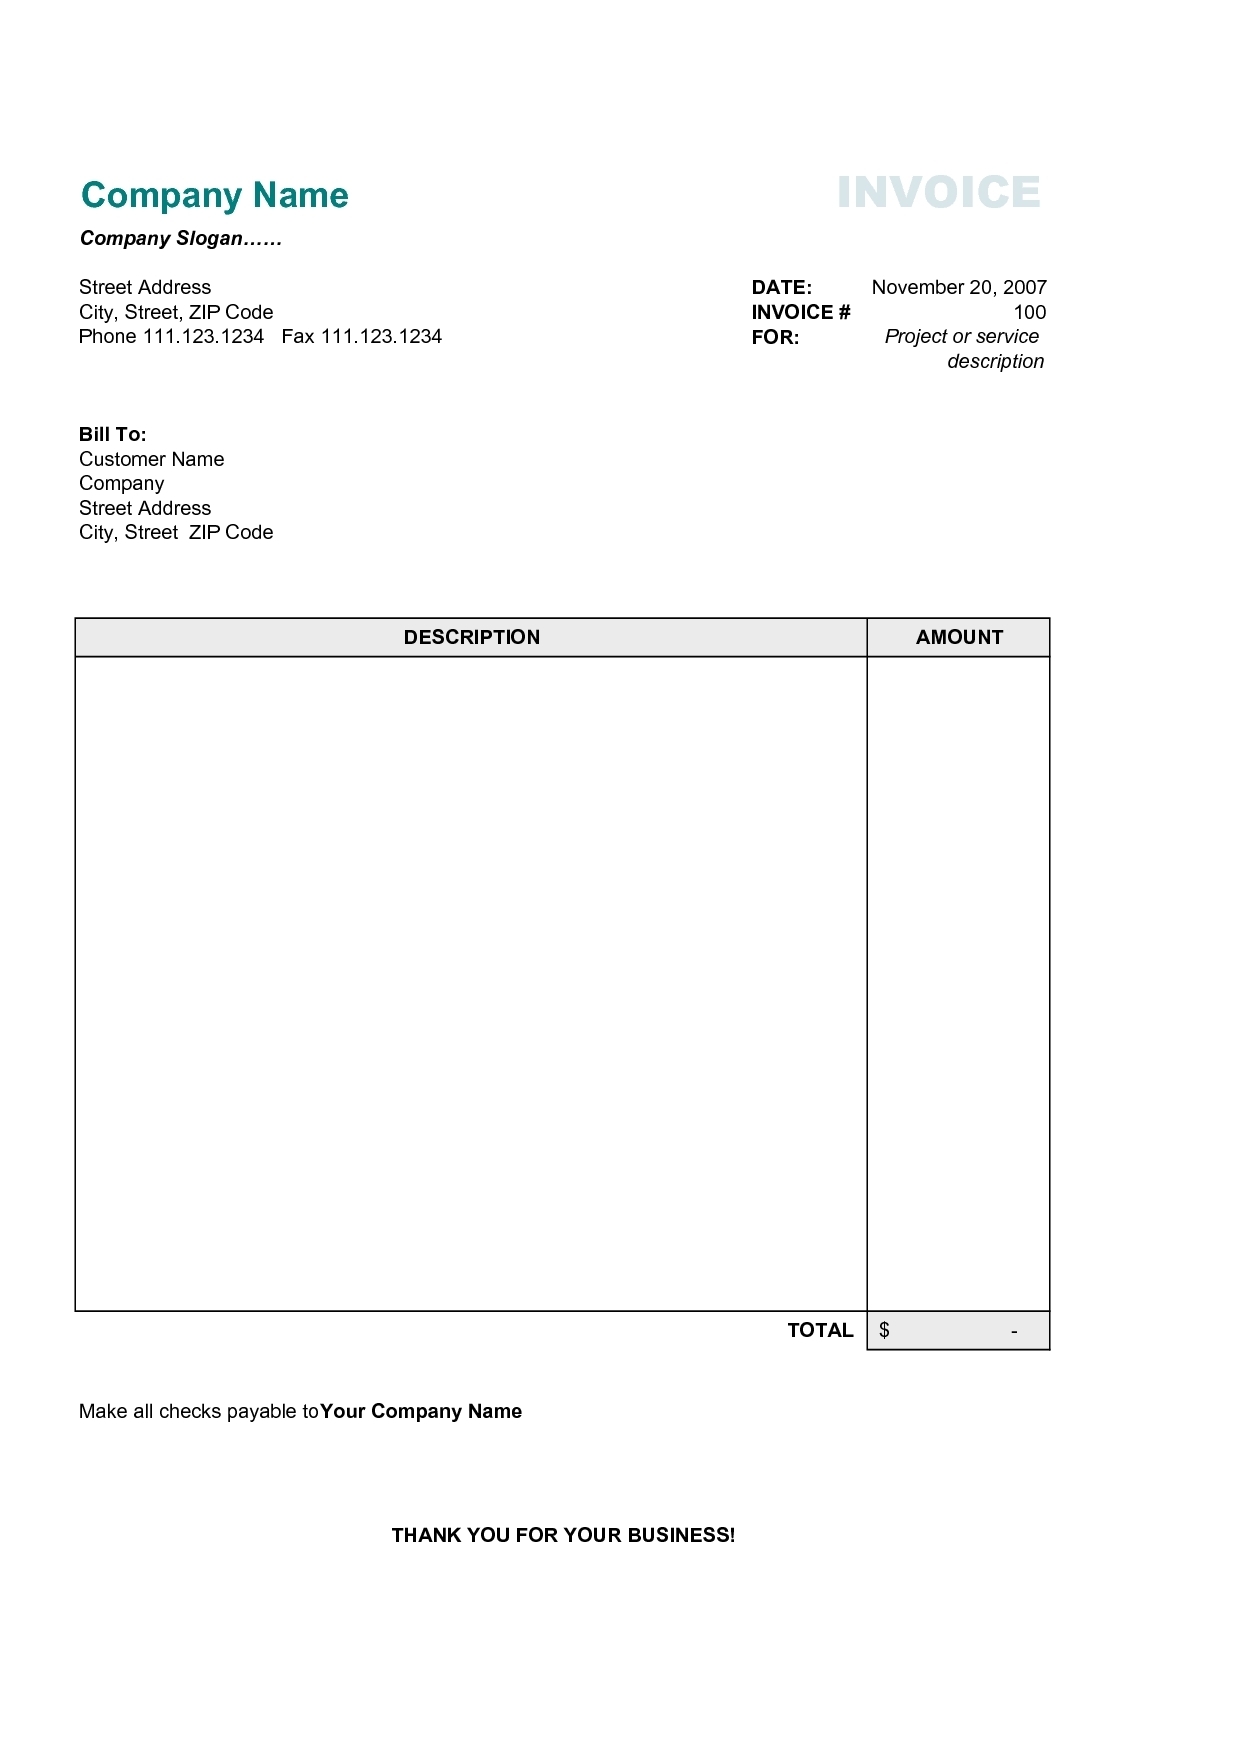 Blank invoice template, simple excel invoice templates | 8ws 